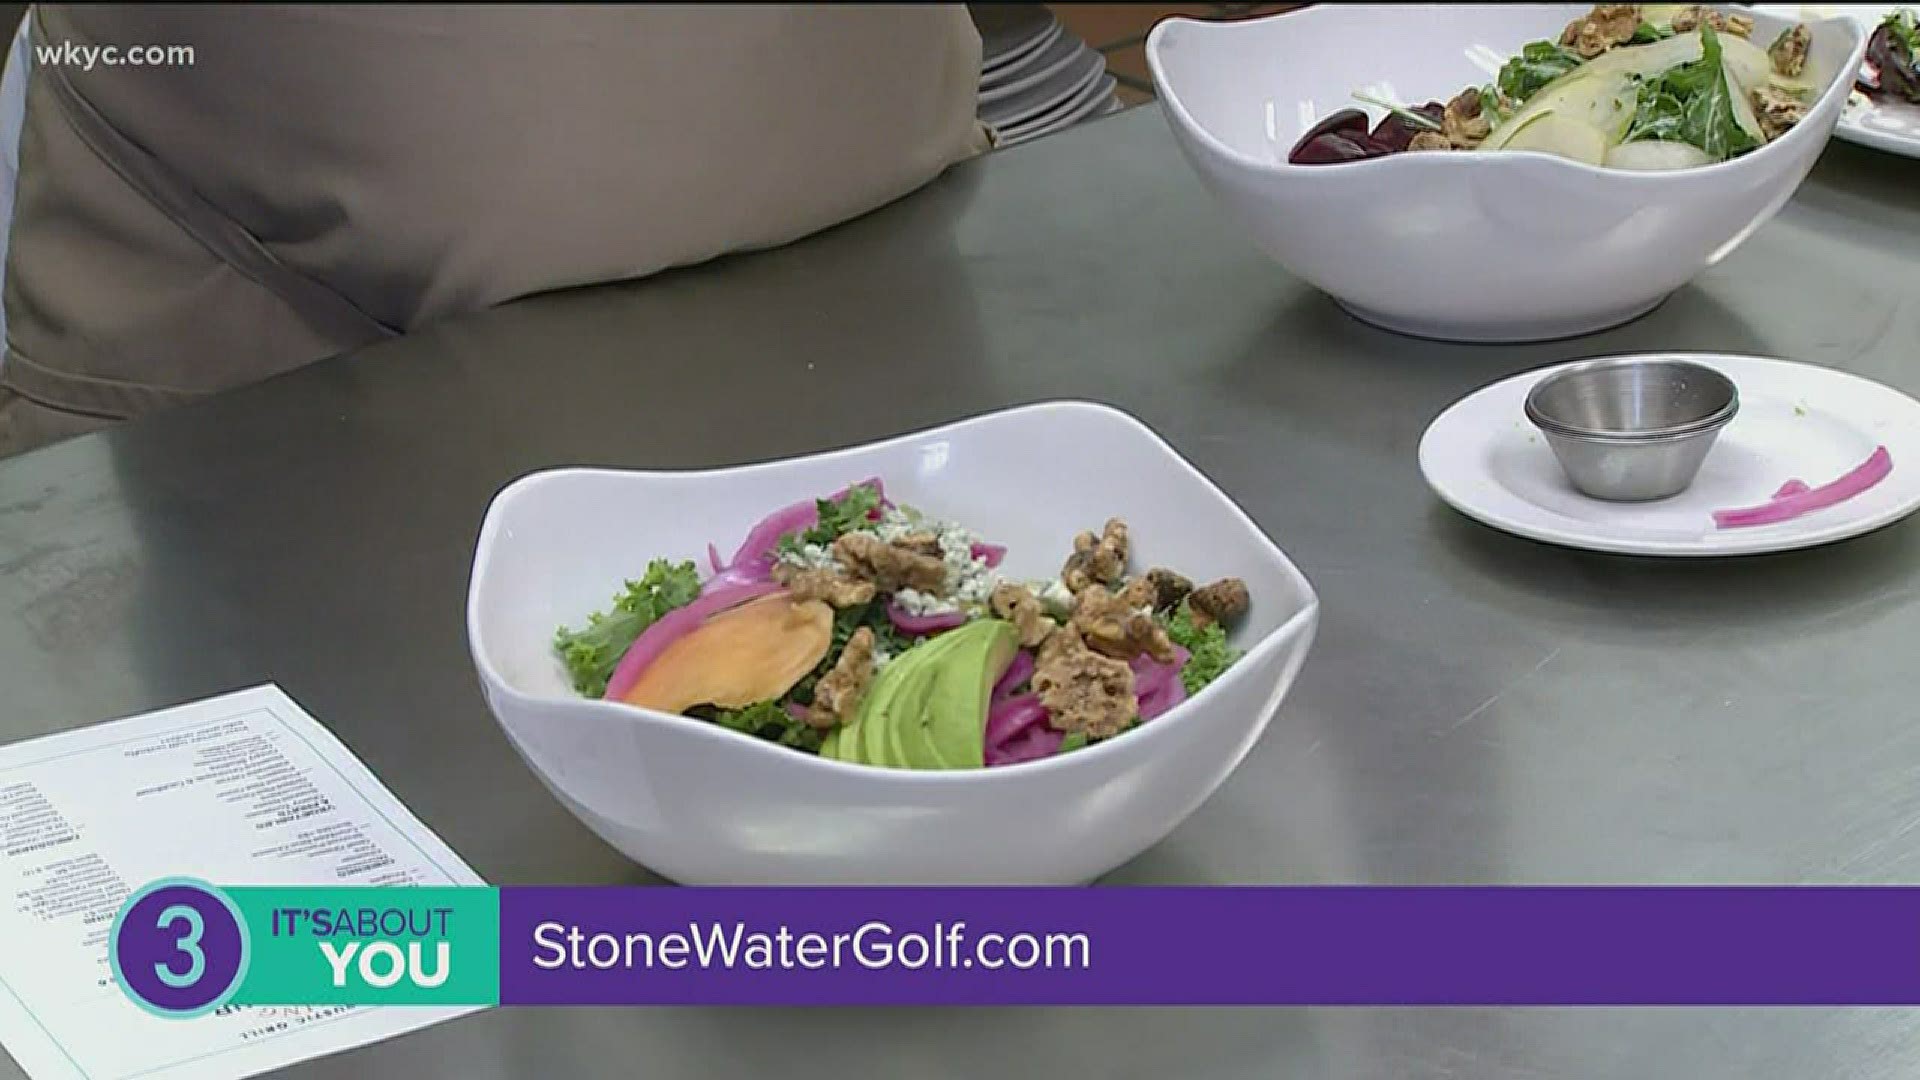 Kathryn Neidus from StoneWater Golf Course & Venue talks with Joe and shows him how to make one of their amazing dishes!